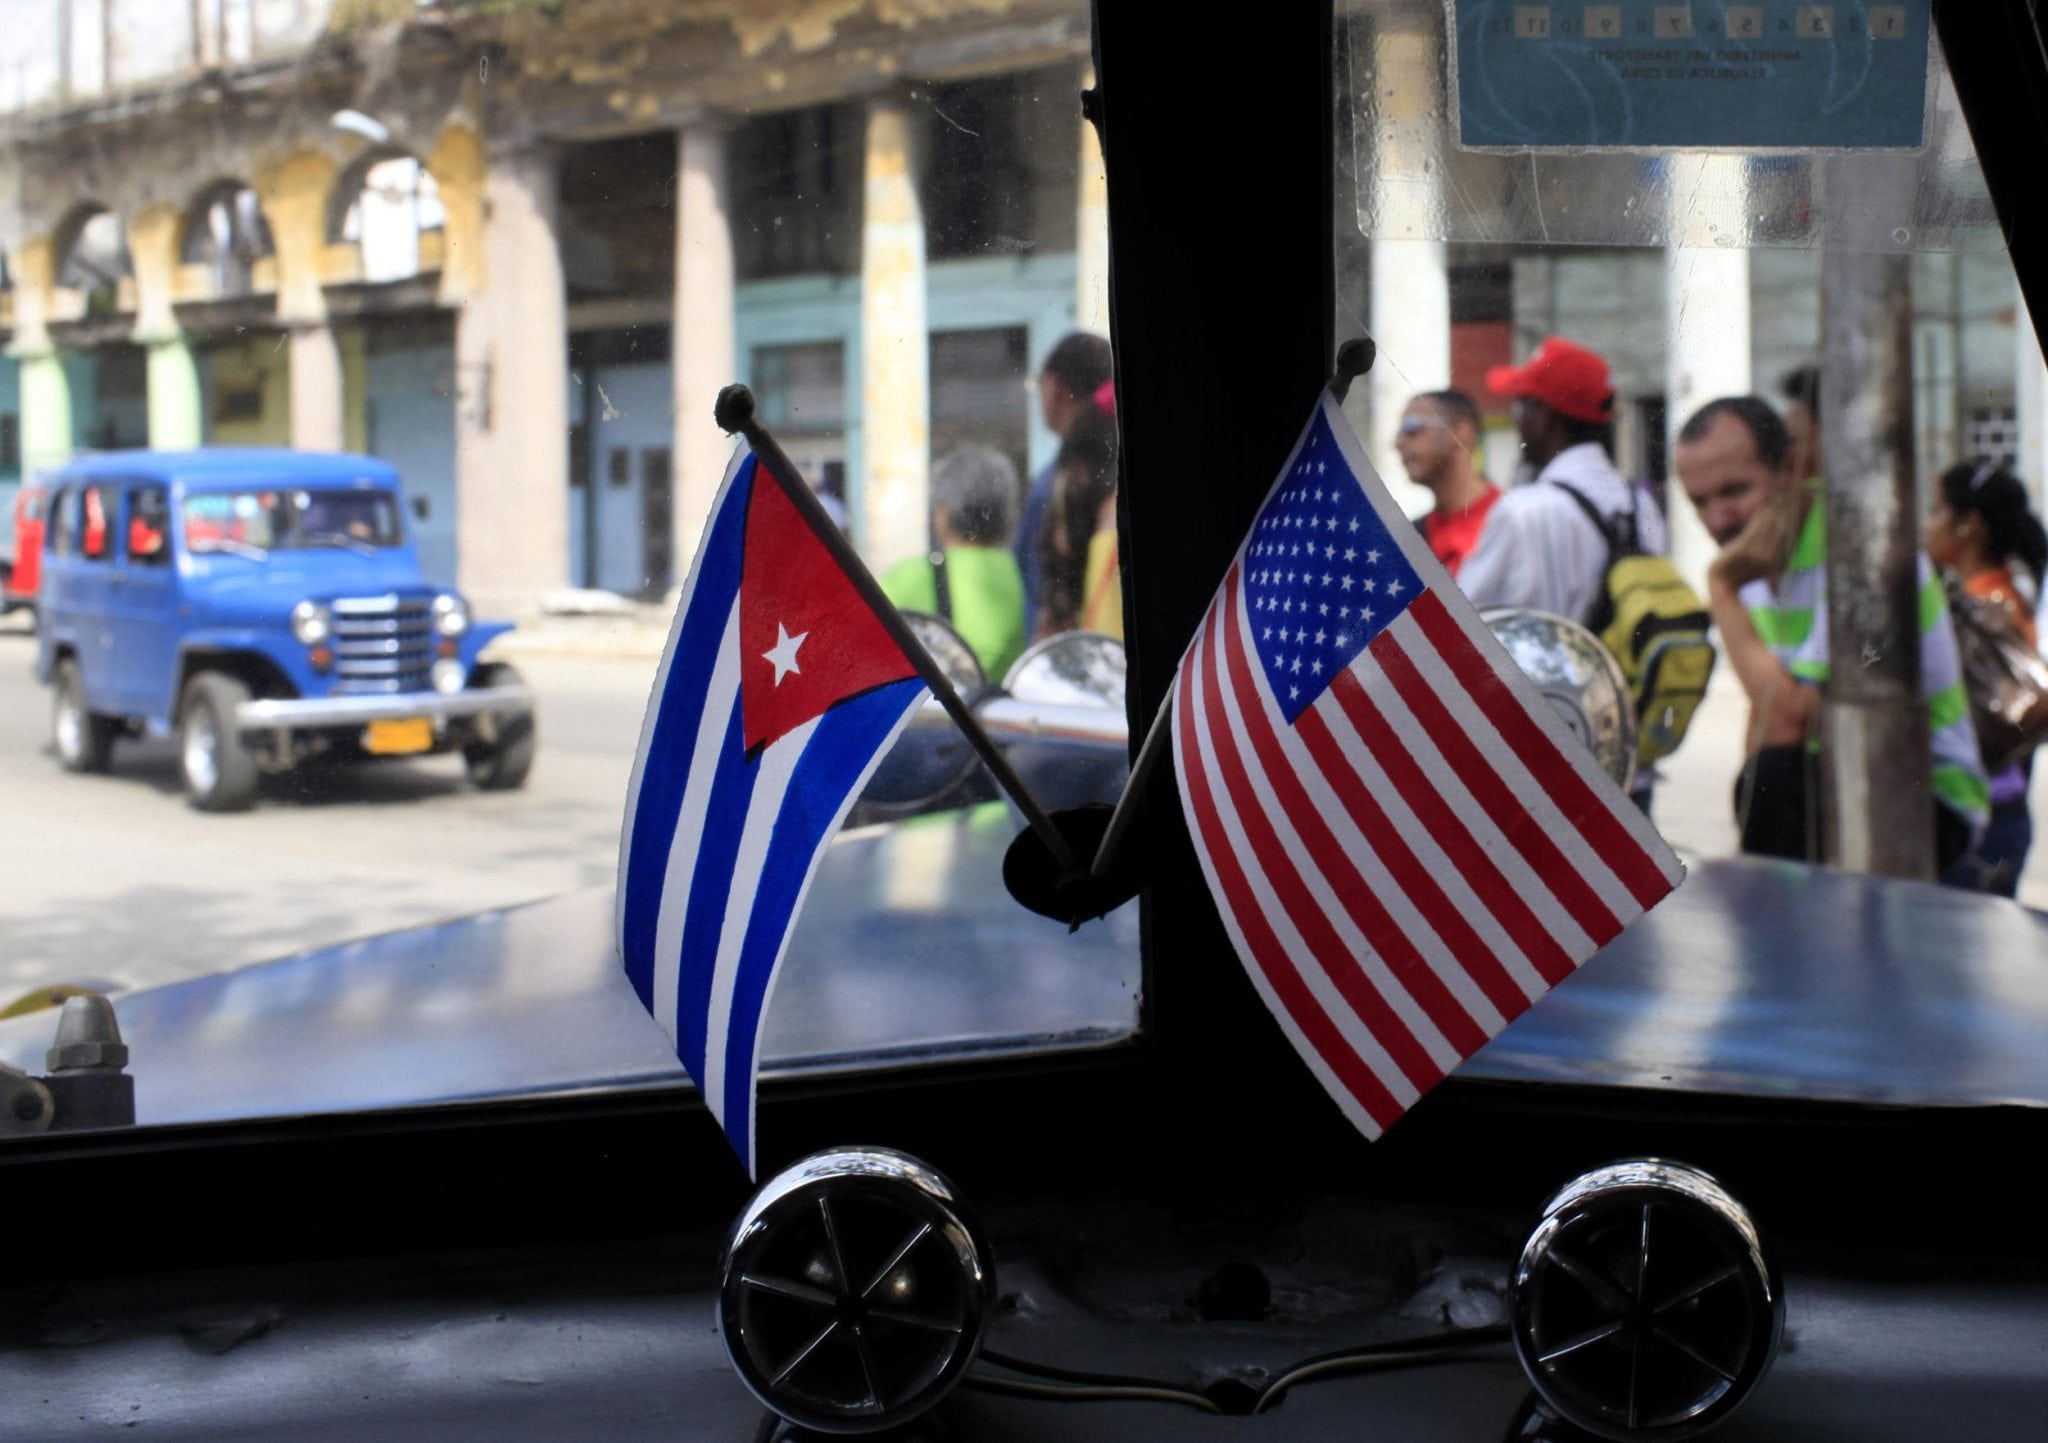 The new rules open up Cuba to greater American travel and allow U.S. citizens to start bringing home small amounts of Cuban cigars after more than a half-century ban. (AP Photo/, File)